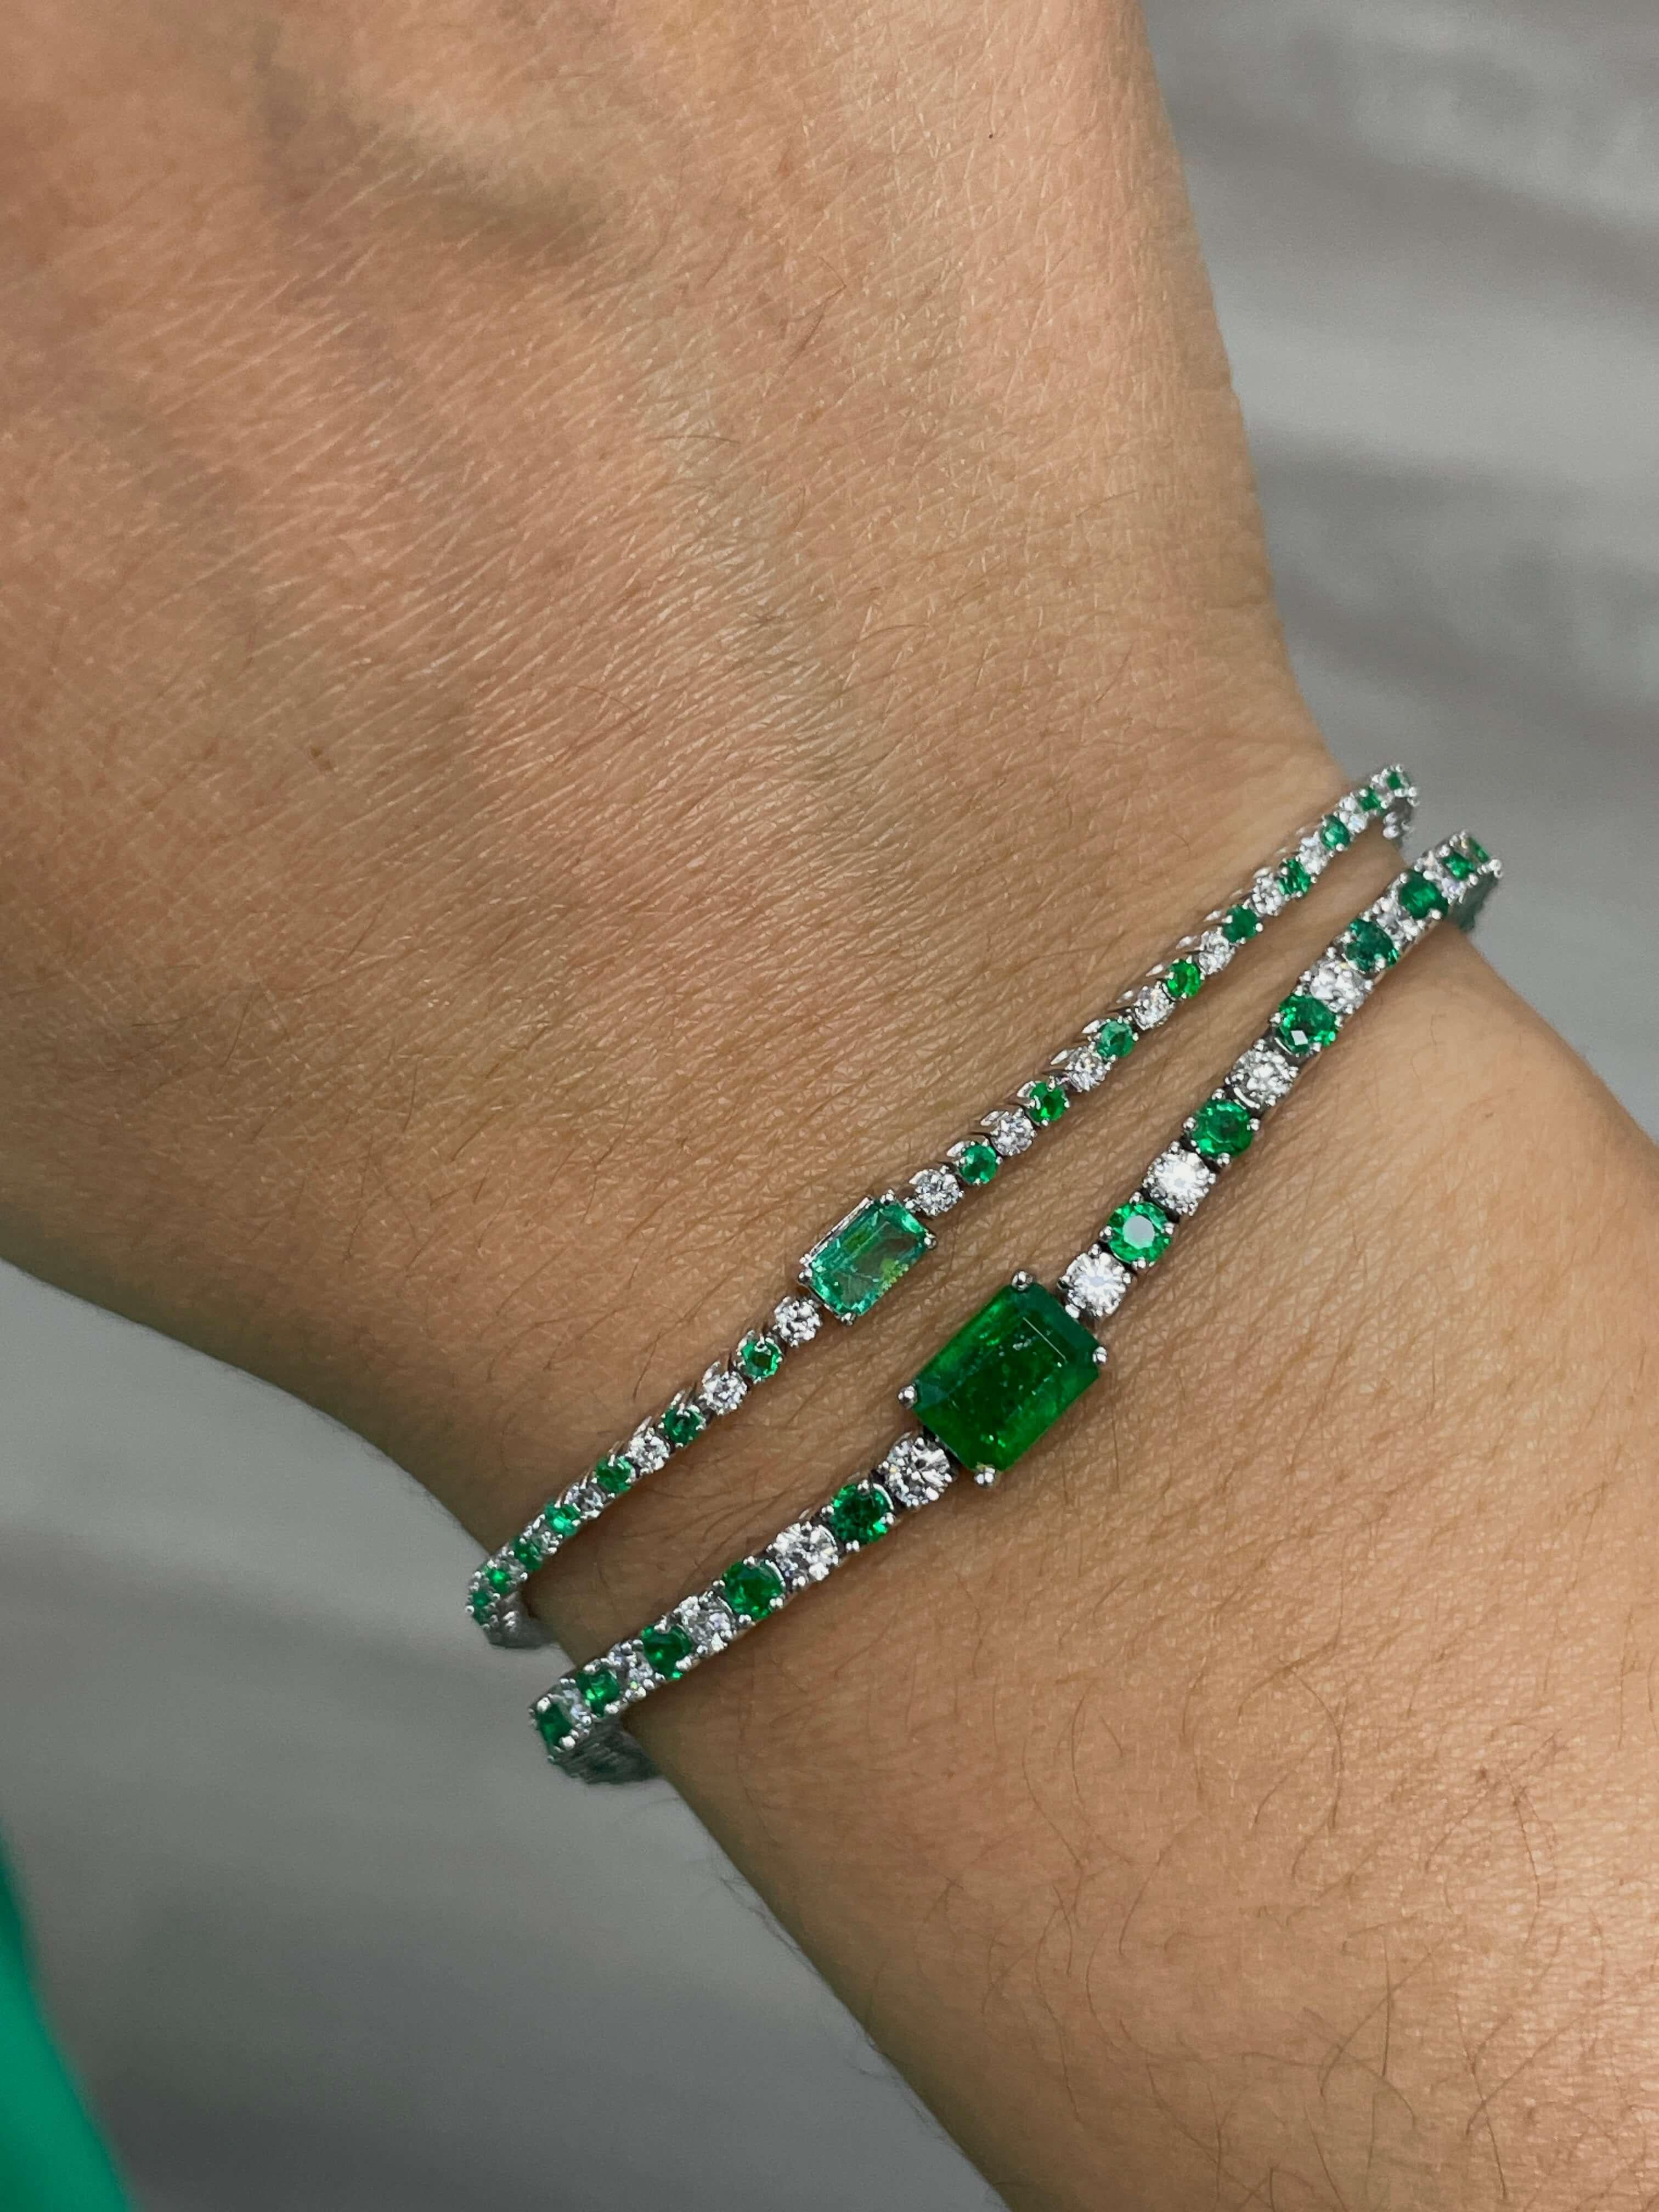 Add a pop of color to your everyday wardrobe with this emerald and diamond bracelet featuring a beautiful emerald center stone and alternating round diamonds and emeralds. Available in two center stone sizes, 7x5 and 5x3.

14K White Gold Emerald and